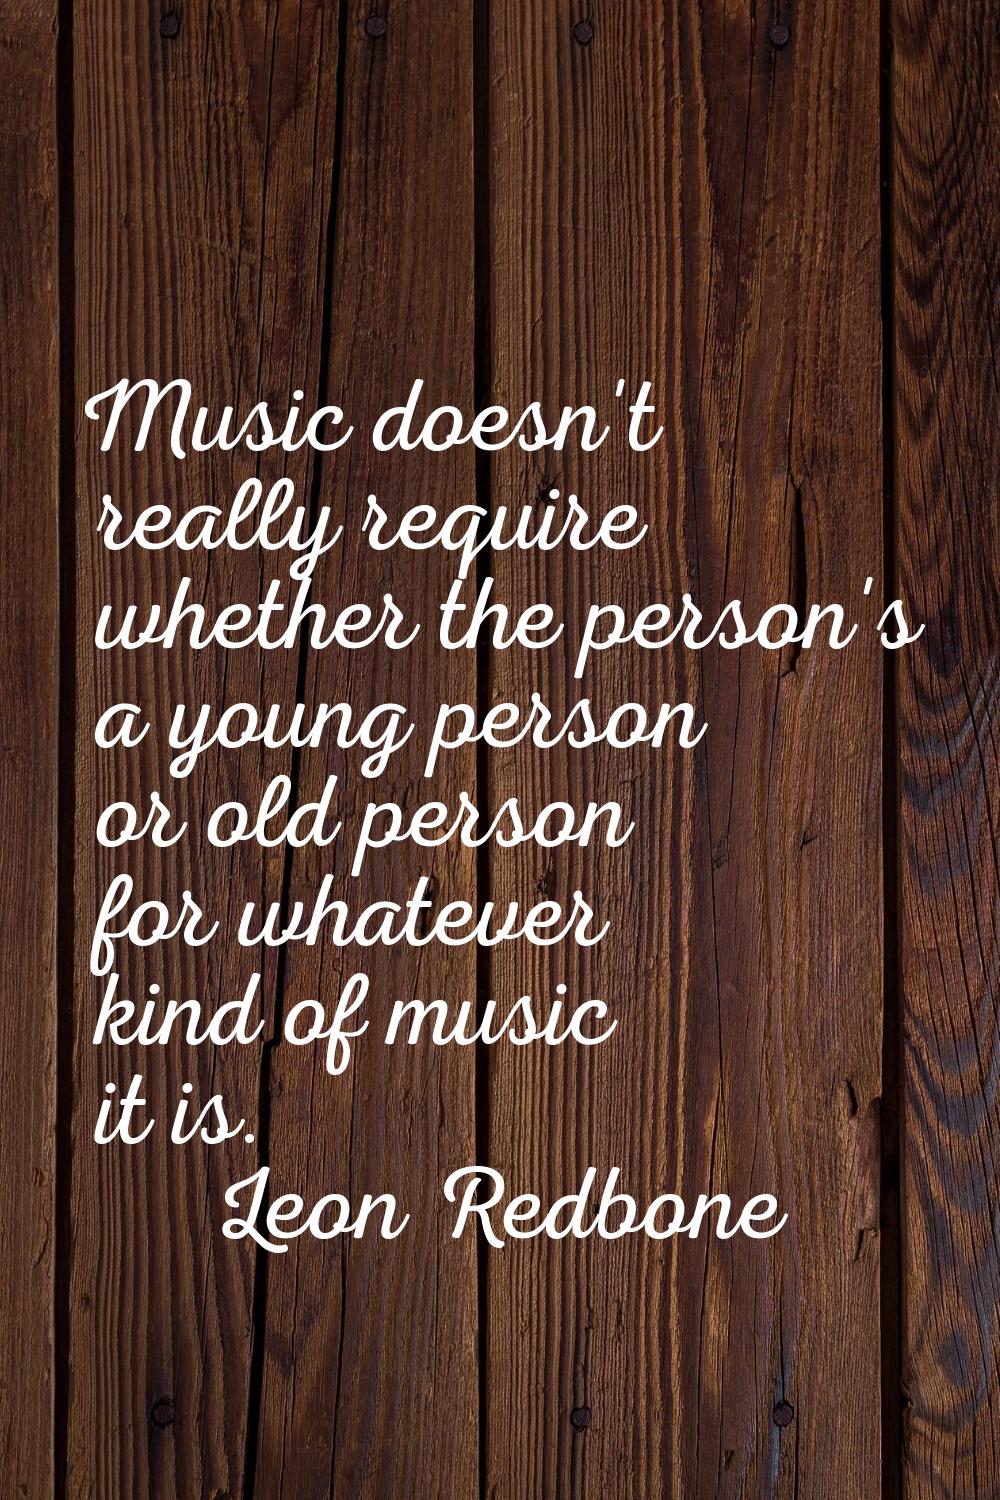 Music doesn't really require whether the person's a young person or old person for whatever kind of